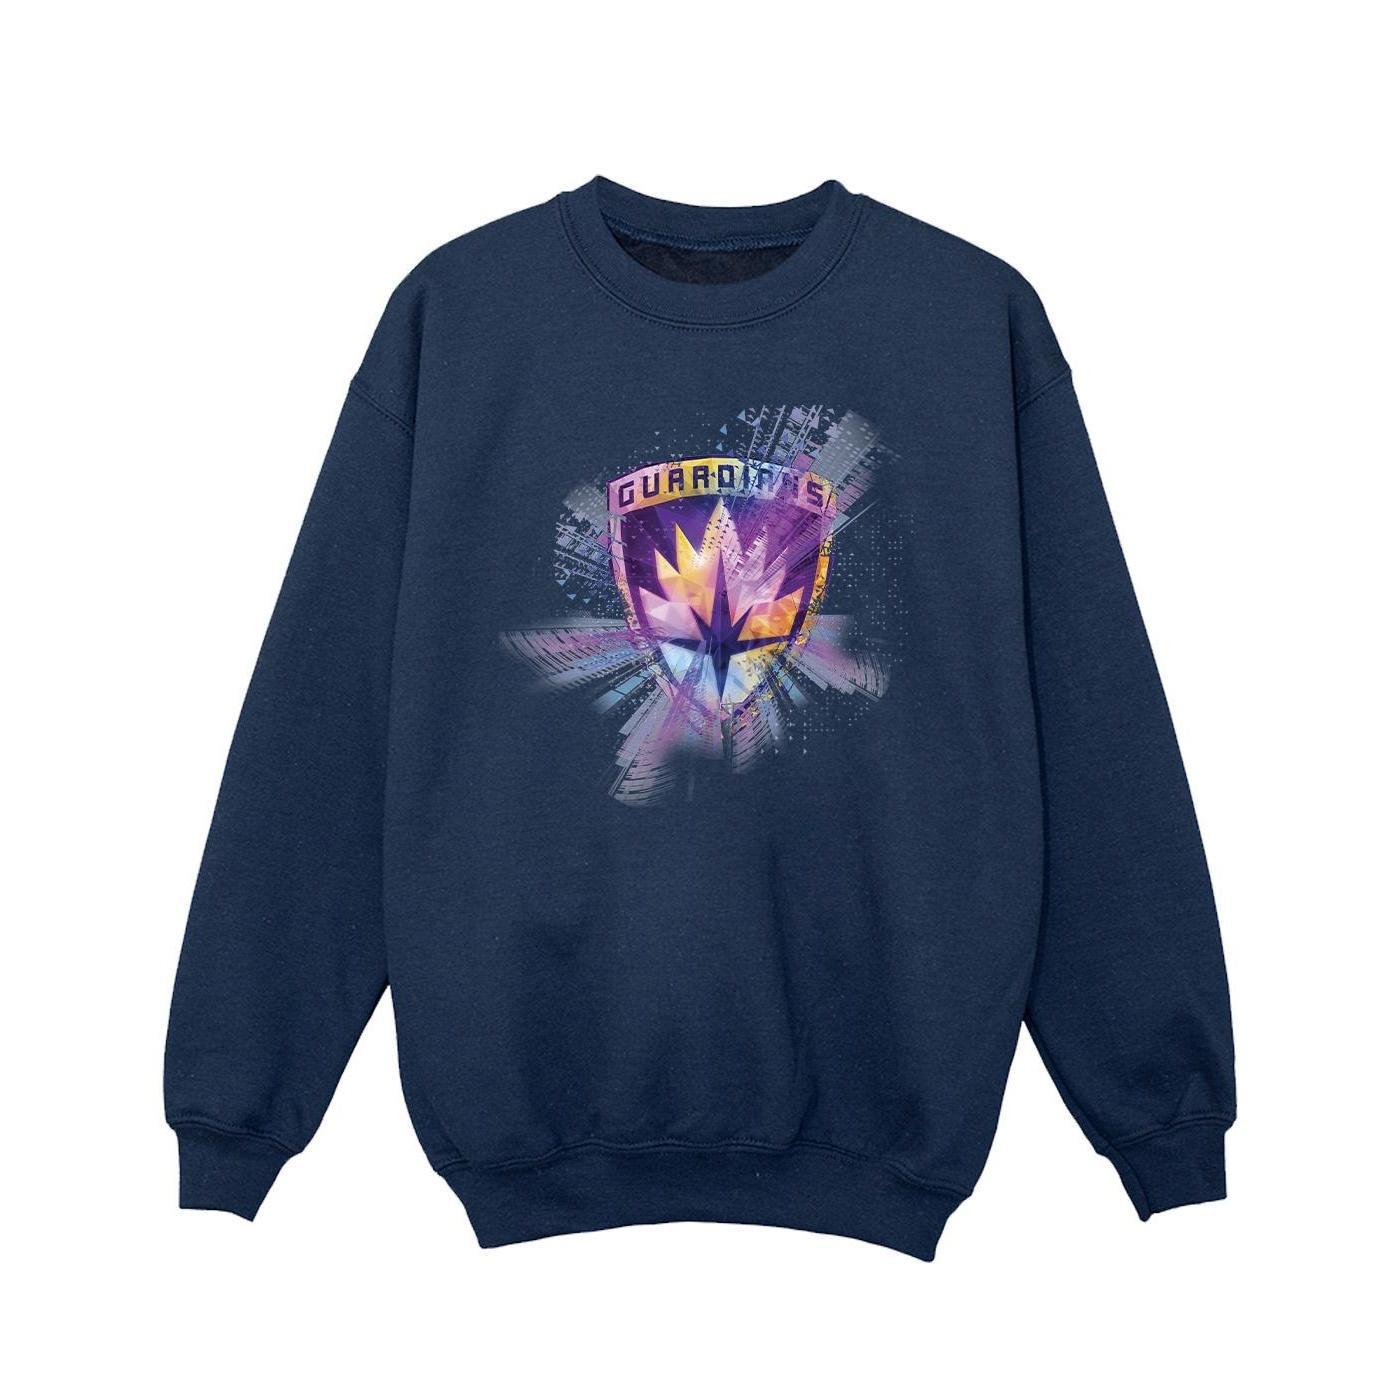 Marvel Girls Guardians Of The Galaxy Abstract Star Lord Sweatshirt (Navy Blue) (7-8 Years)